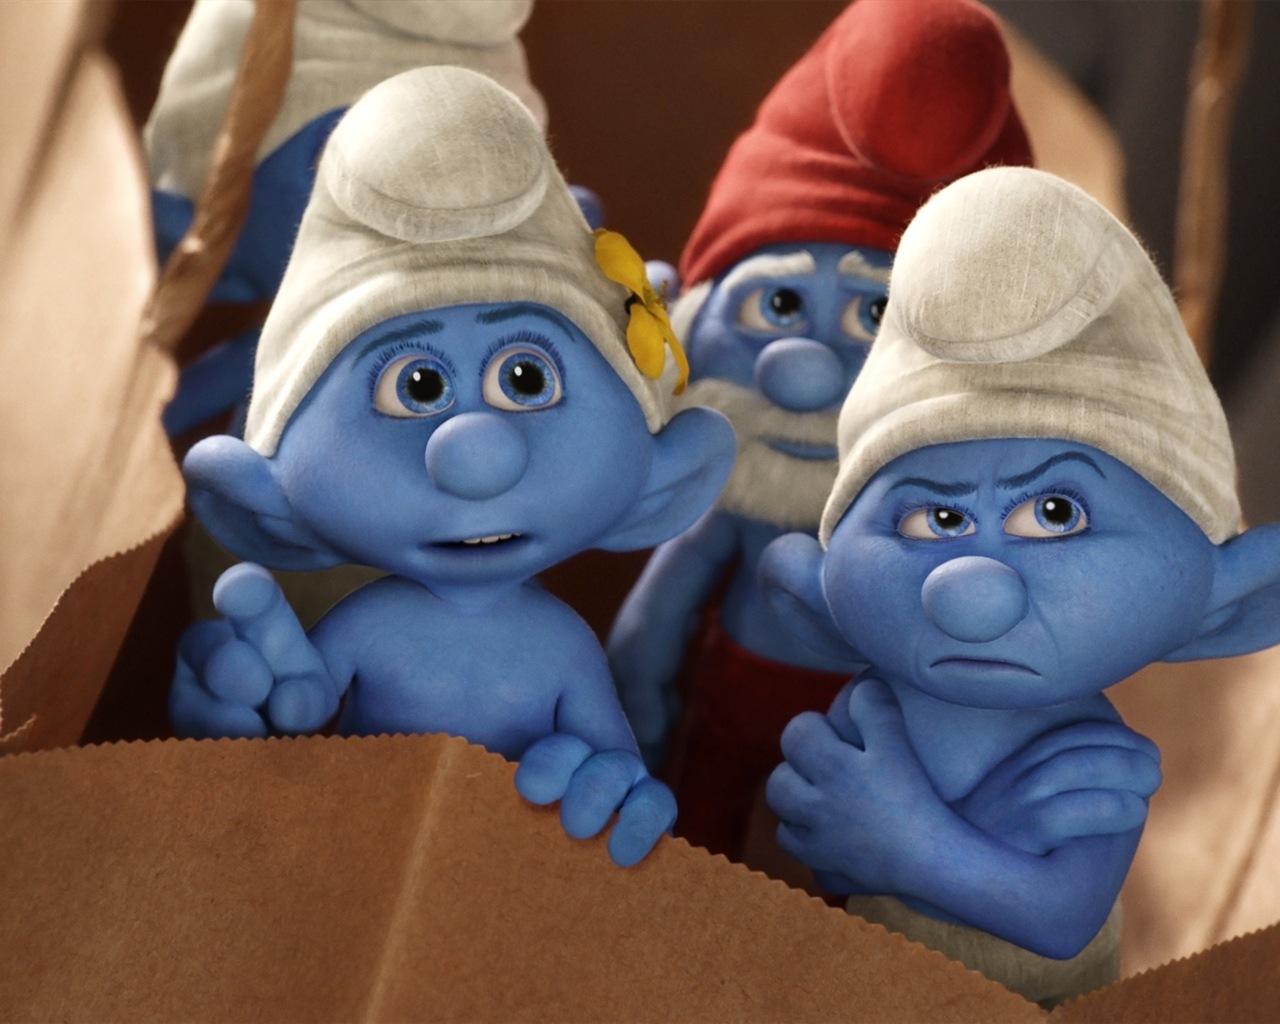 The Smurfs 2 HD movie wallpapers #12 - 1280x1024